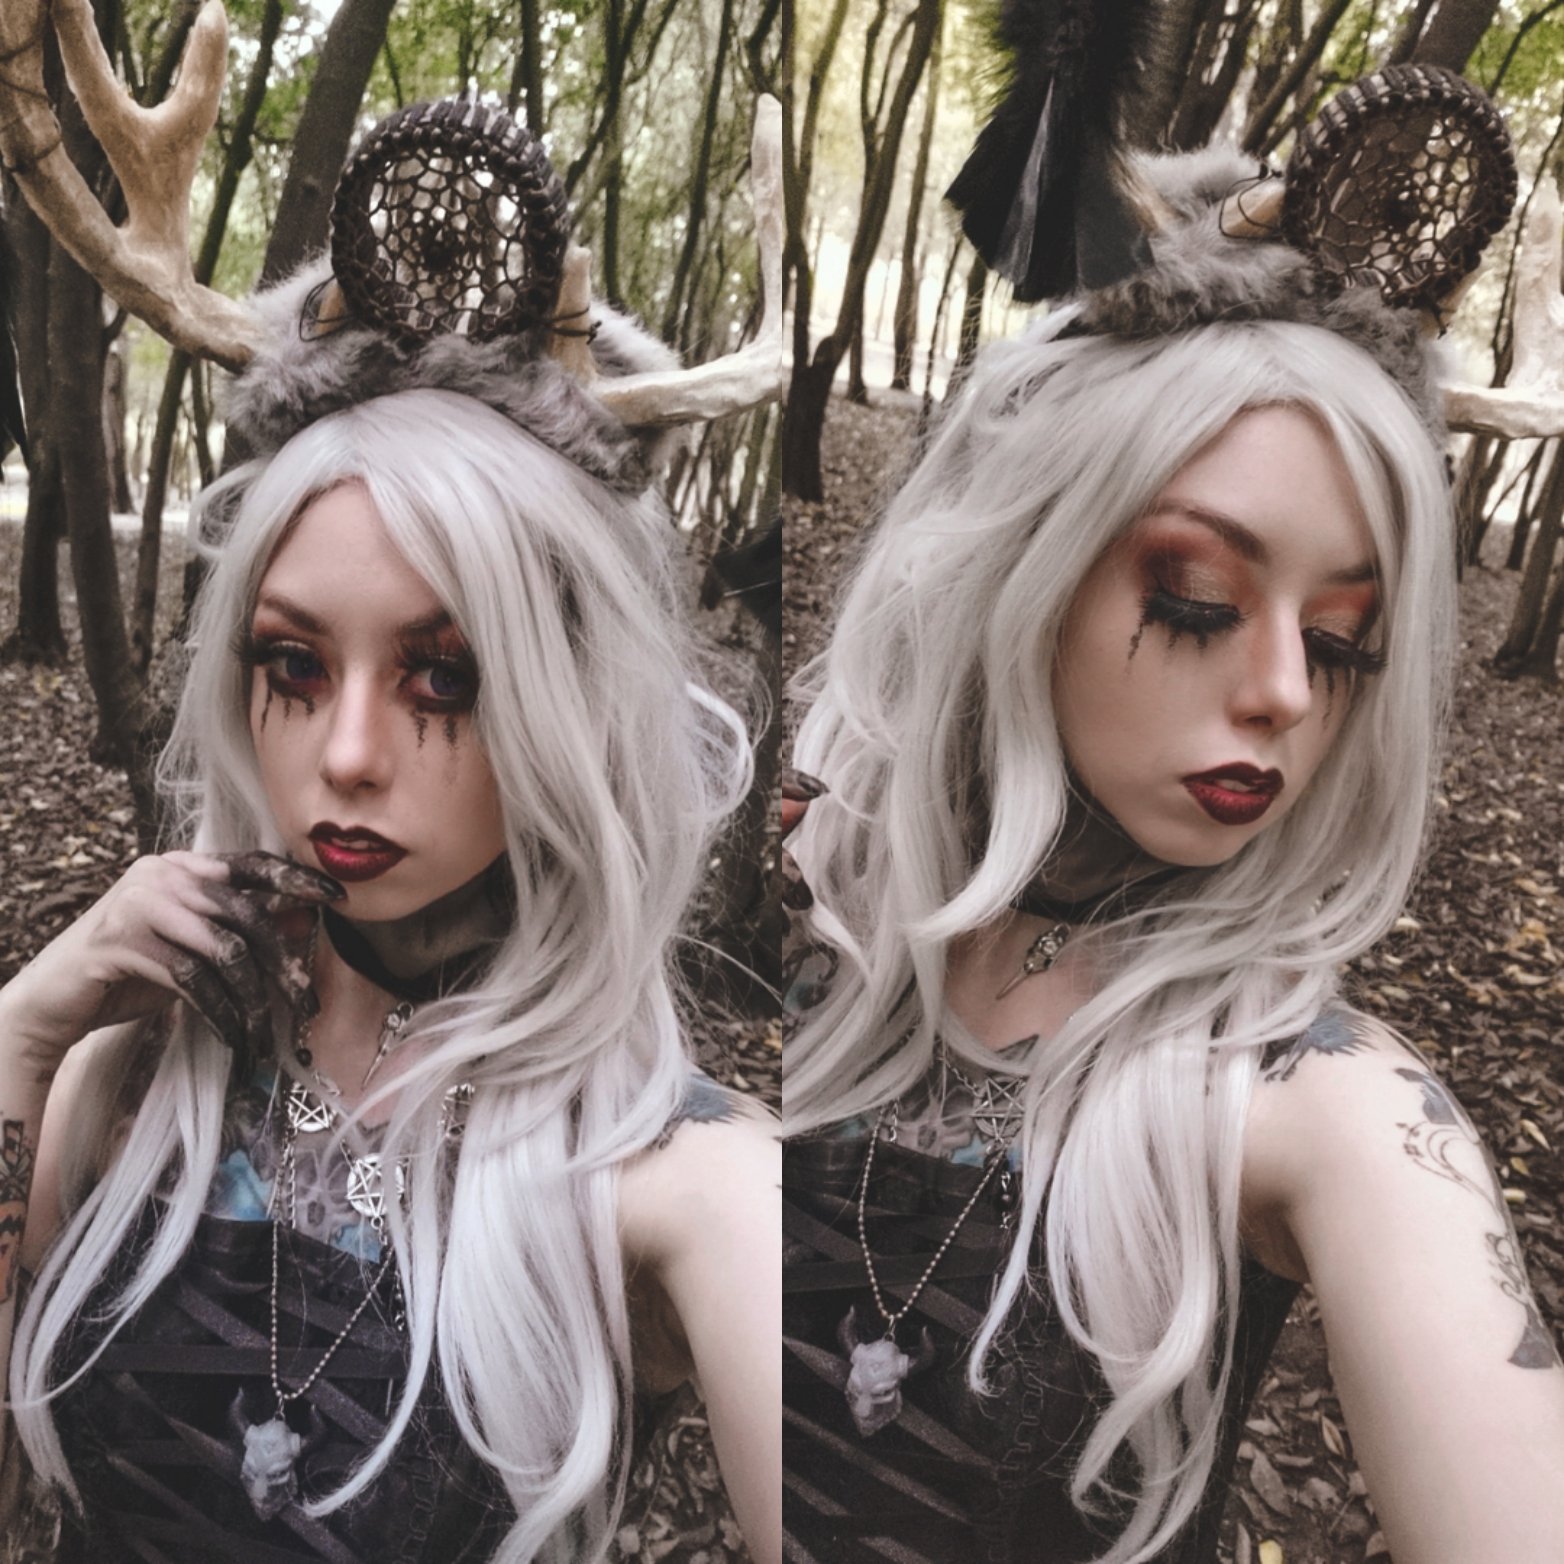 sne hvid oxiderer skat Killian Hollow on Twitter: "🍂PAGAN WITCH🍂 Another witchy makeup, this  photoshoot was a trip in the forest and the results was amazing, we also  played with fire #witch #makeup #pagan #artistsontwitter #makeuplooks #